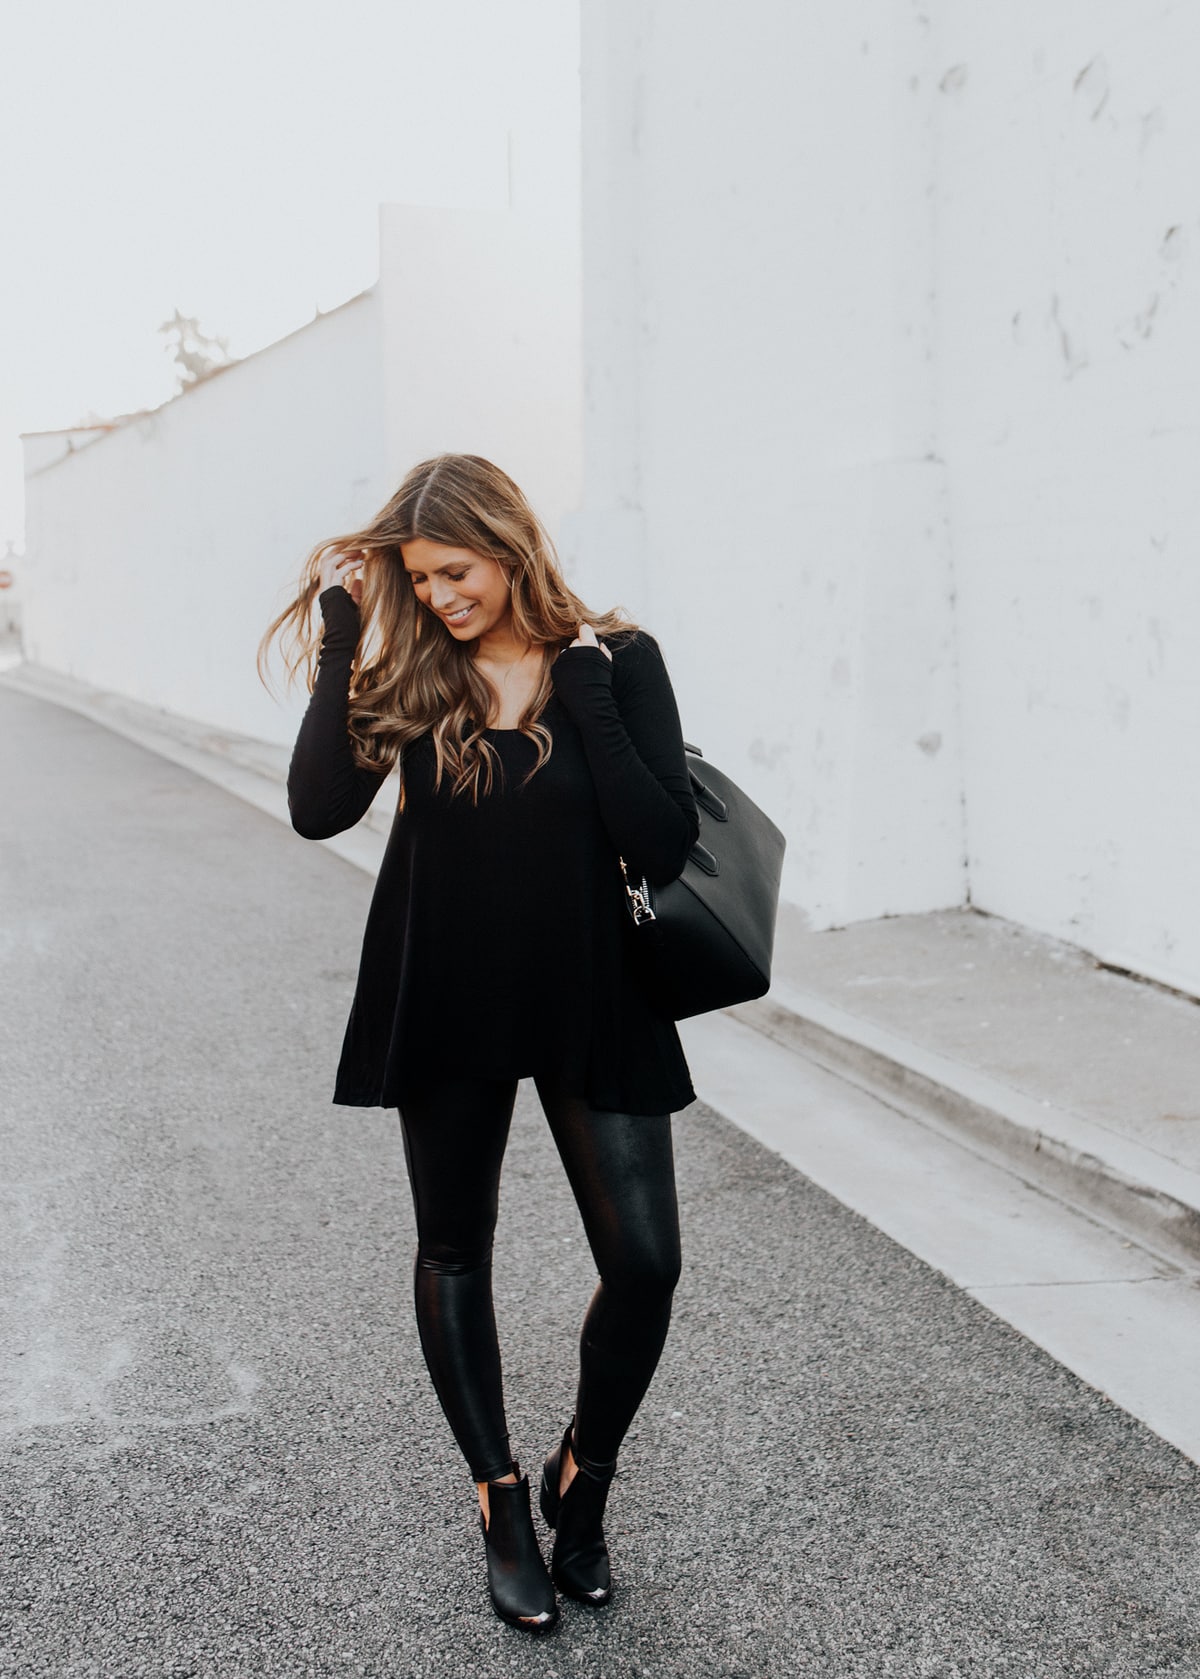 25 Classy All Black Outfits You Must Have - Fancy Ideas about Hairstyles,  Nails, Outfits, and Everything